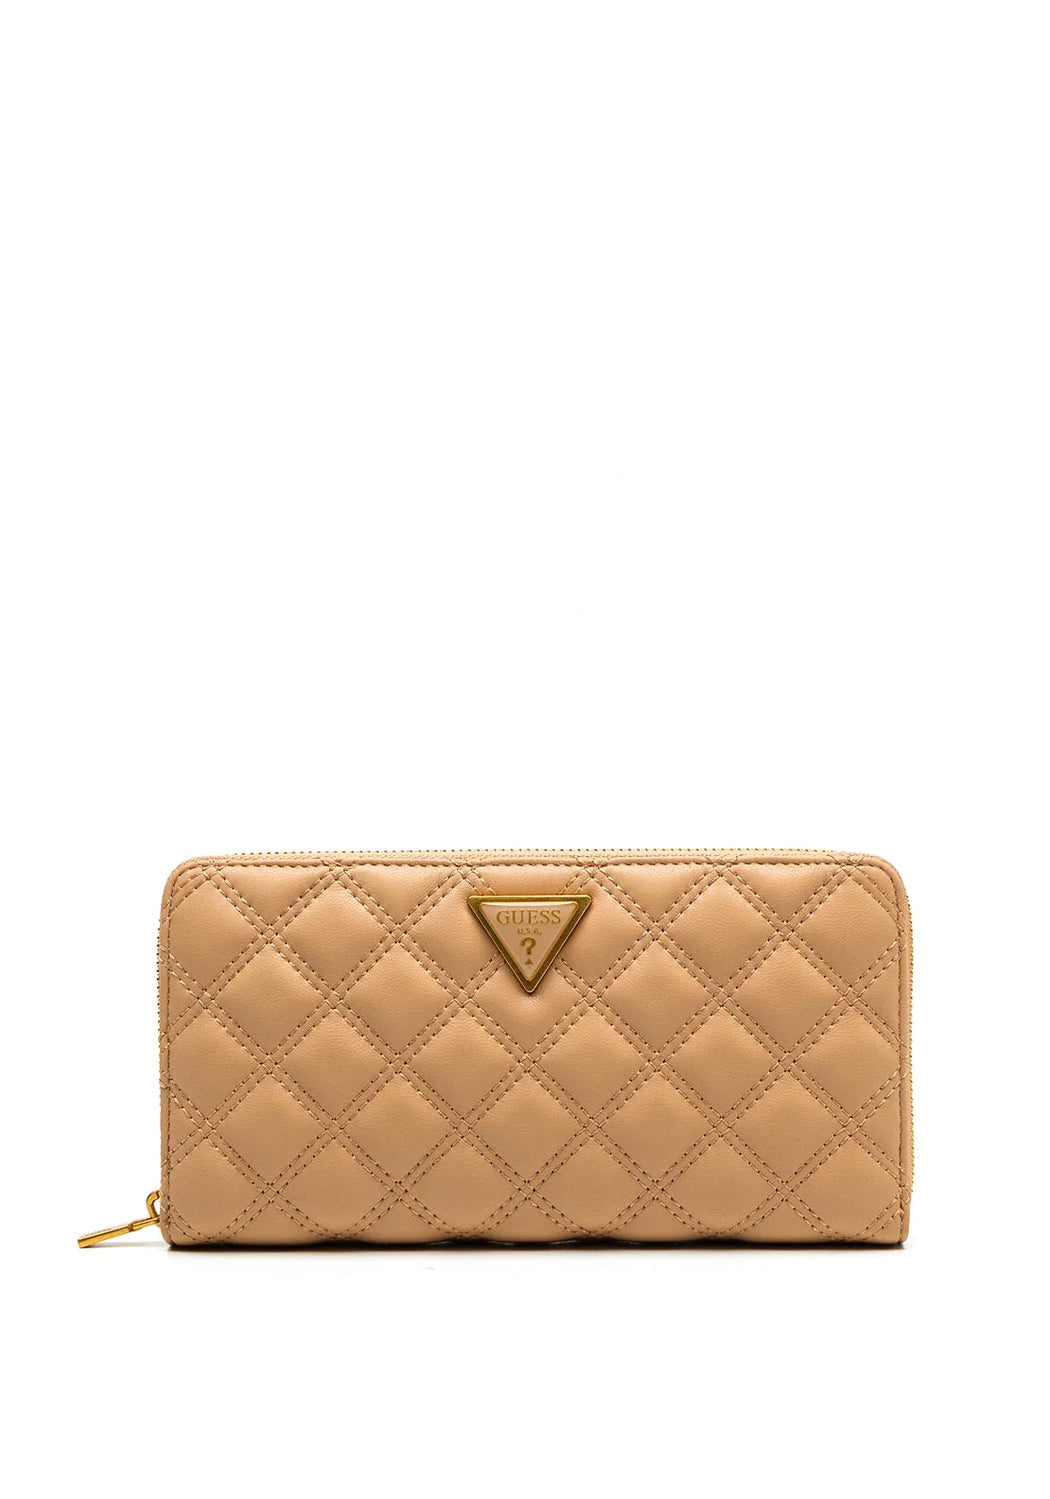 Guess Giully Large Quilted Zip Around Wallet, Beige